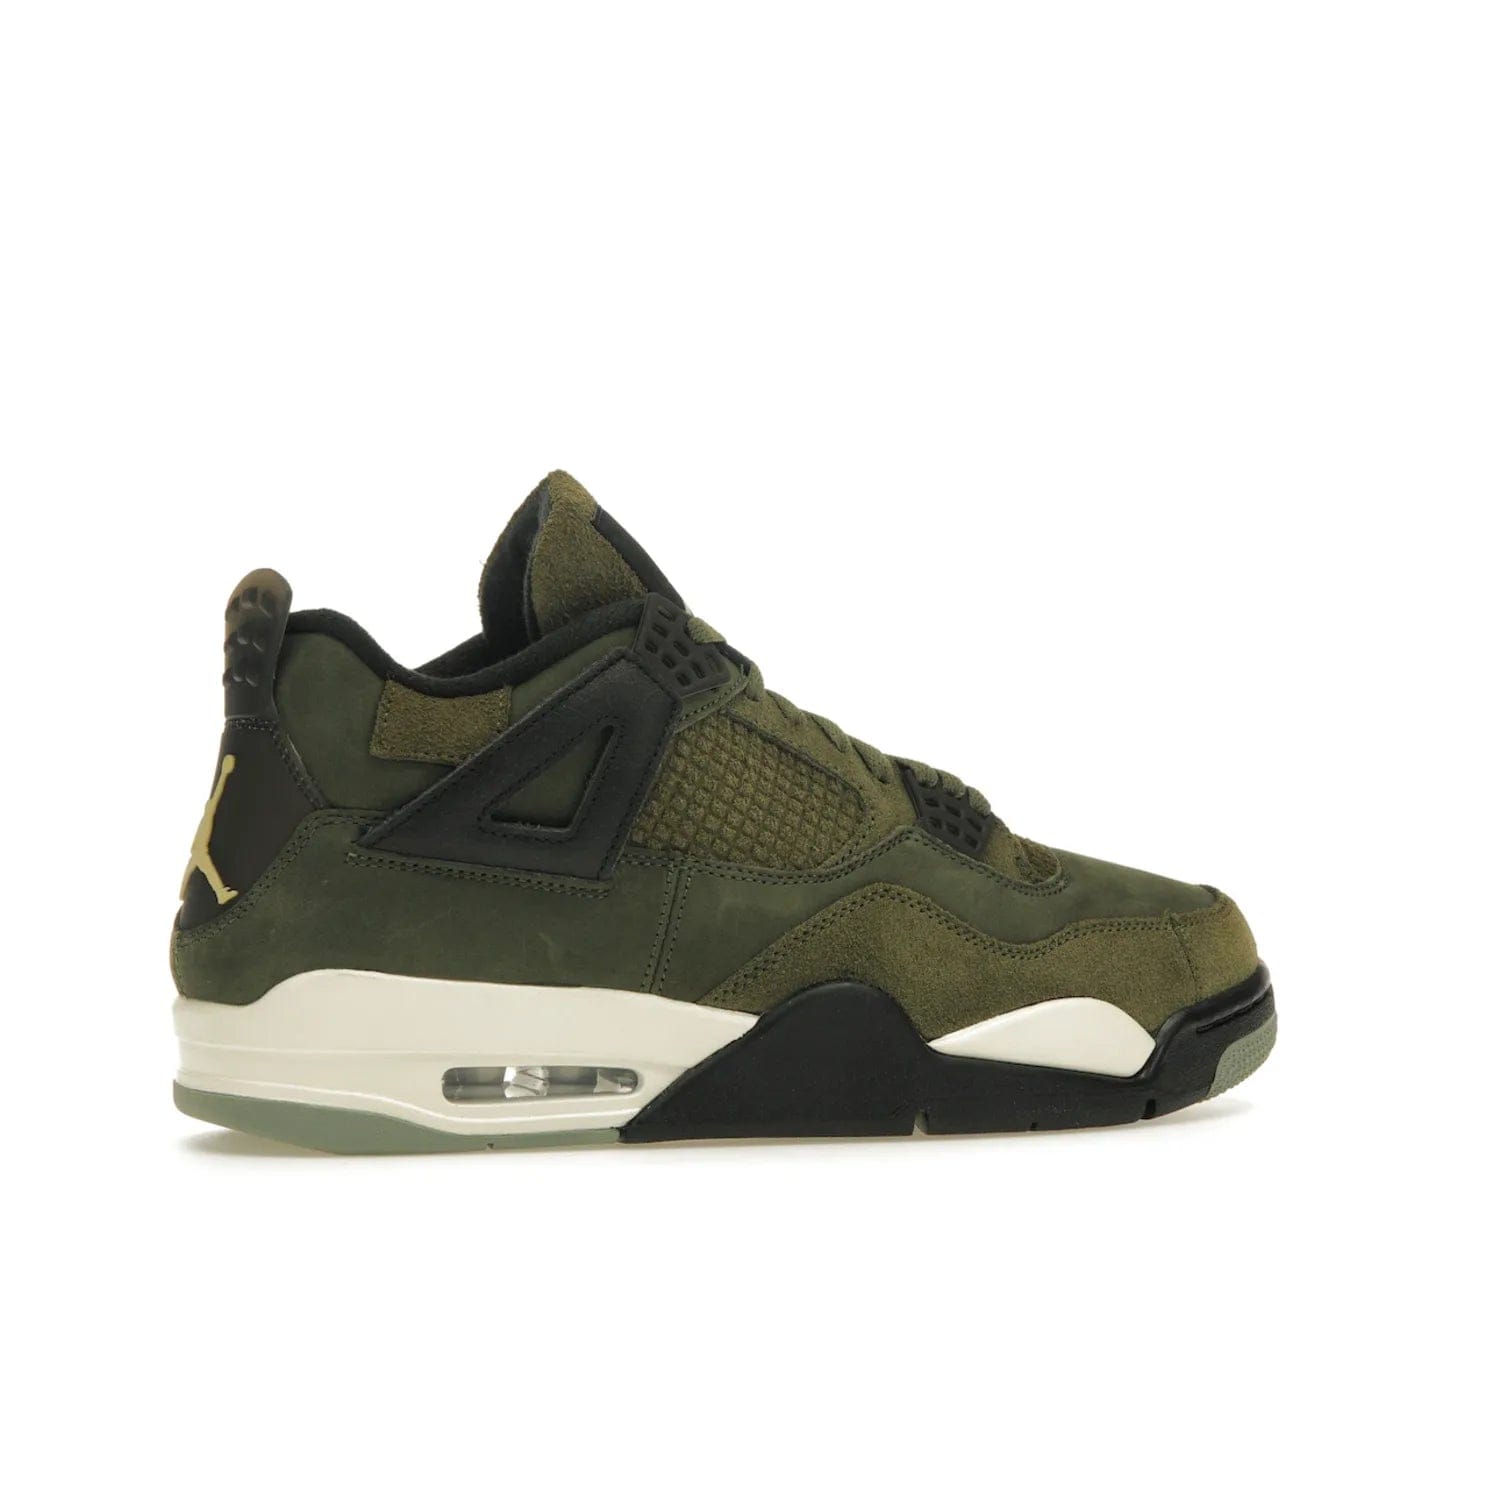 Jordan 4 Retro SE Craft Medium Olive - Image 35 - Only at www.BallersClubKickz.com - Grab the Jordan 4 Retro SE Crafts for a unique style. Combines Medium Olive, Pale Vanilla, Khaki, Black and Sail, with same classic shape, cushioning, and rubber outsole. Available on November 18th!